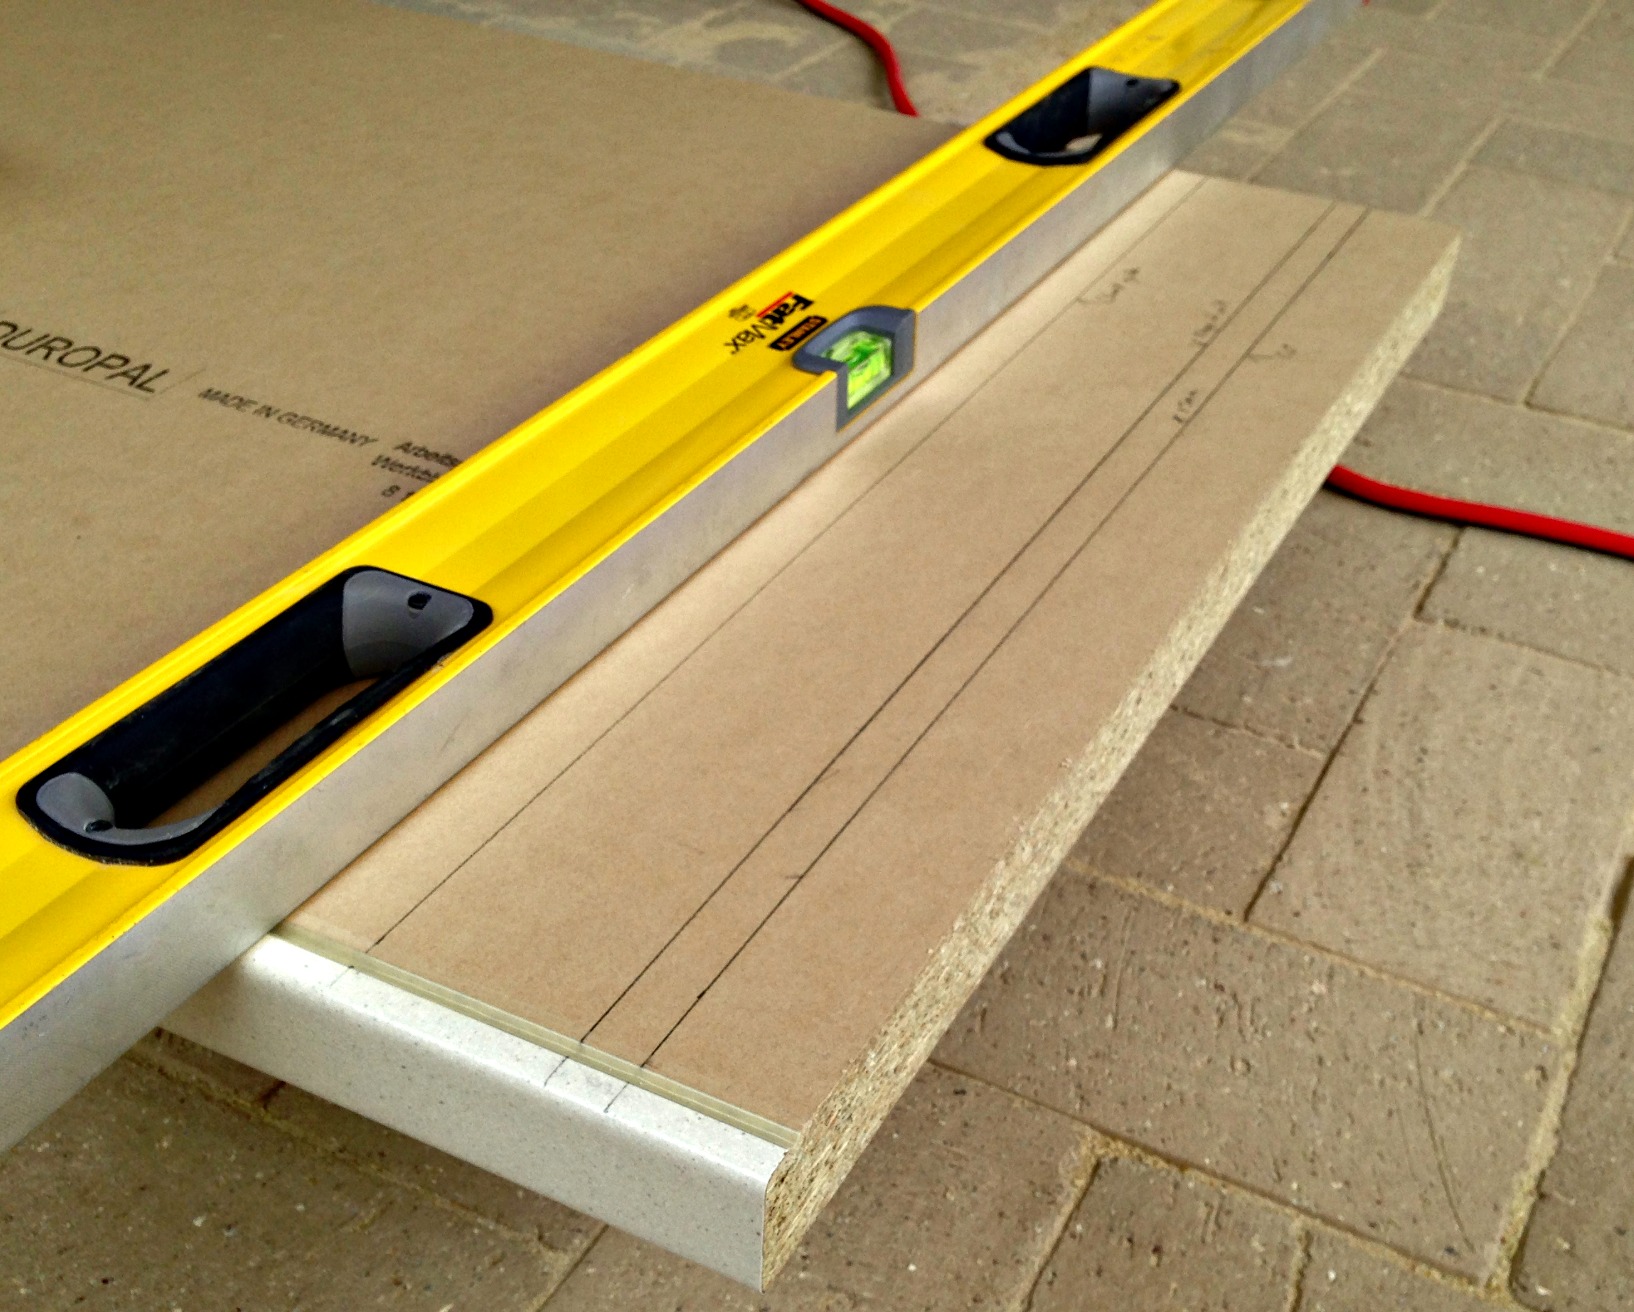 Spirit level clamped to worktop as a straight edge